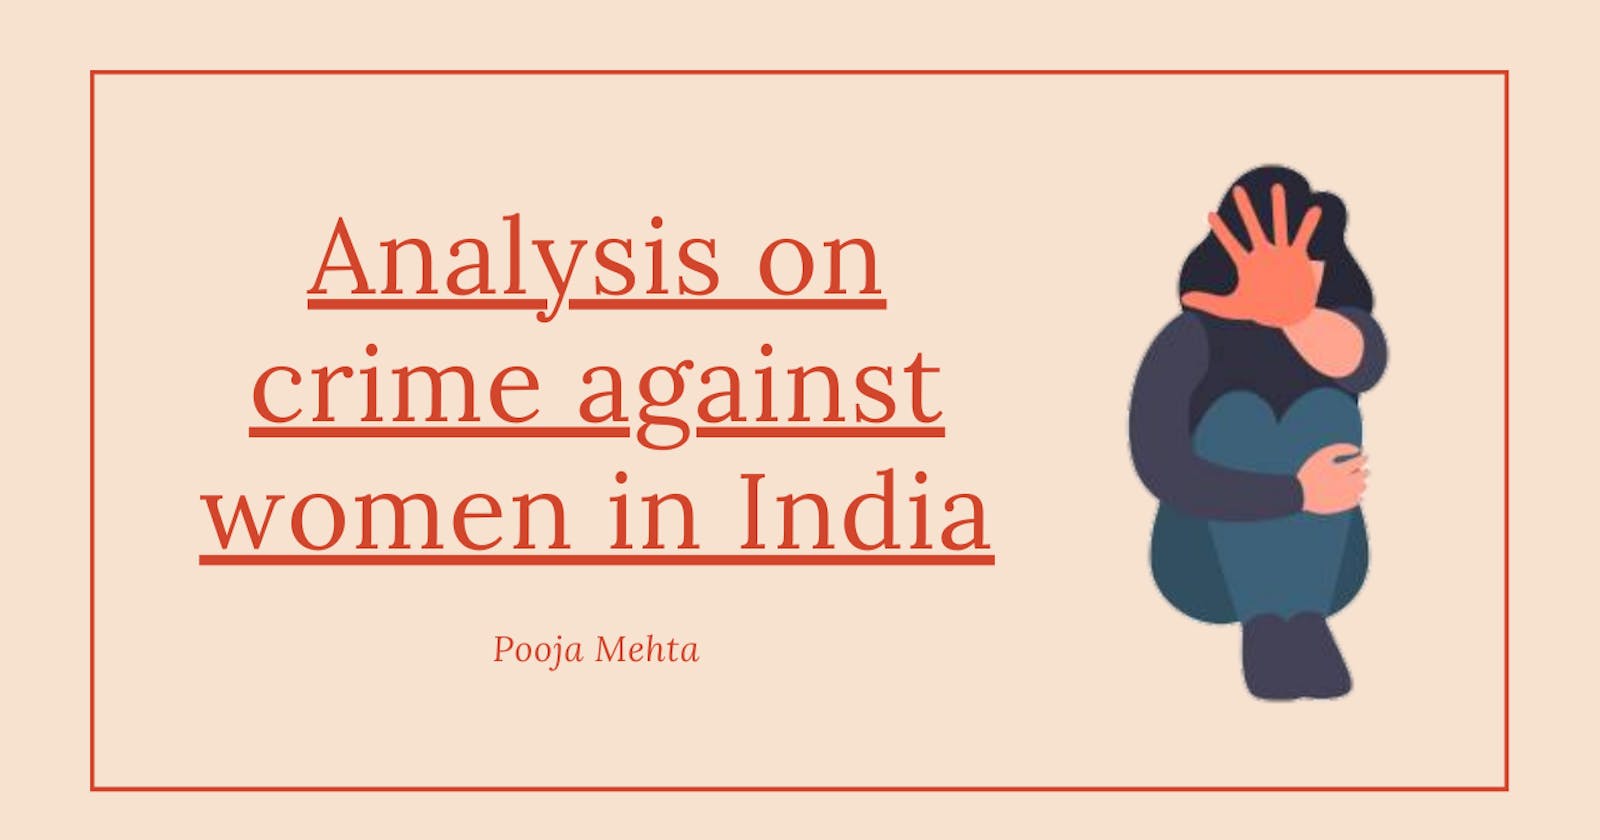 Analysis on crime against women in India